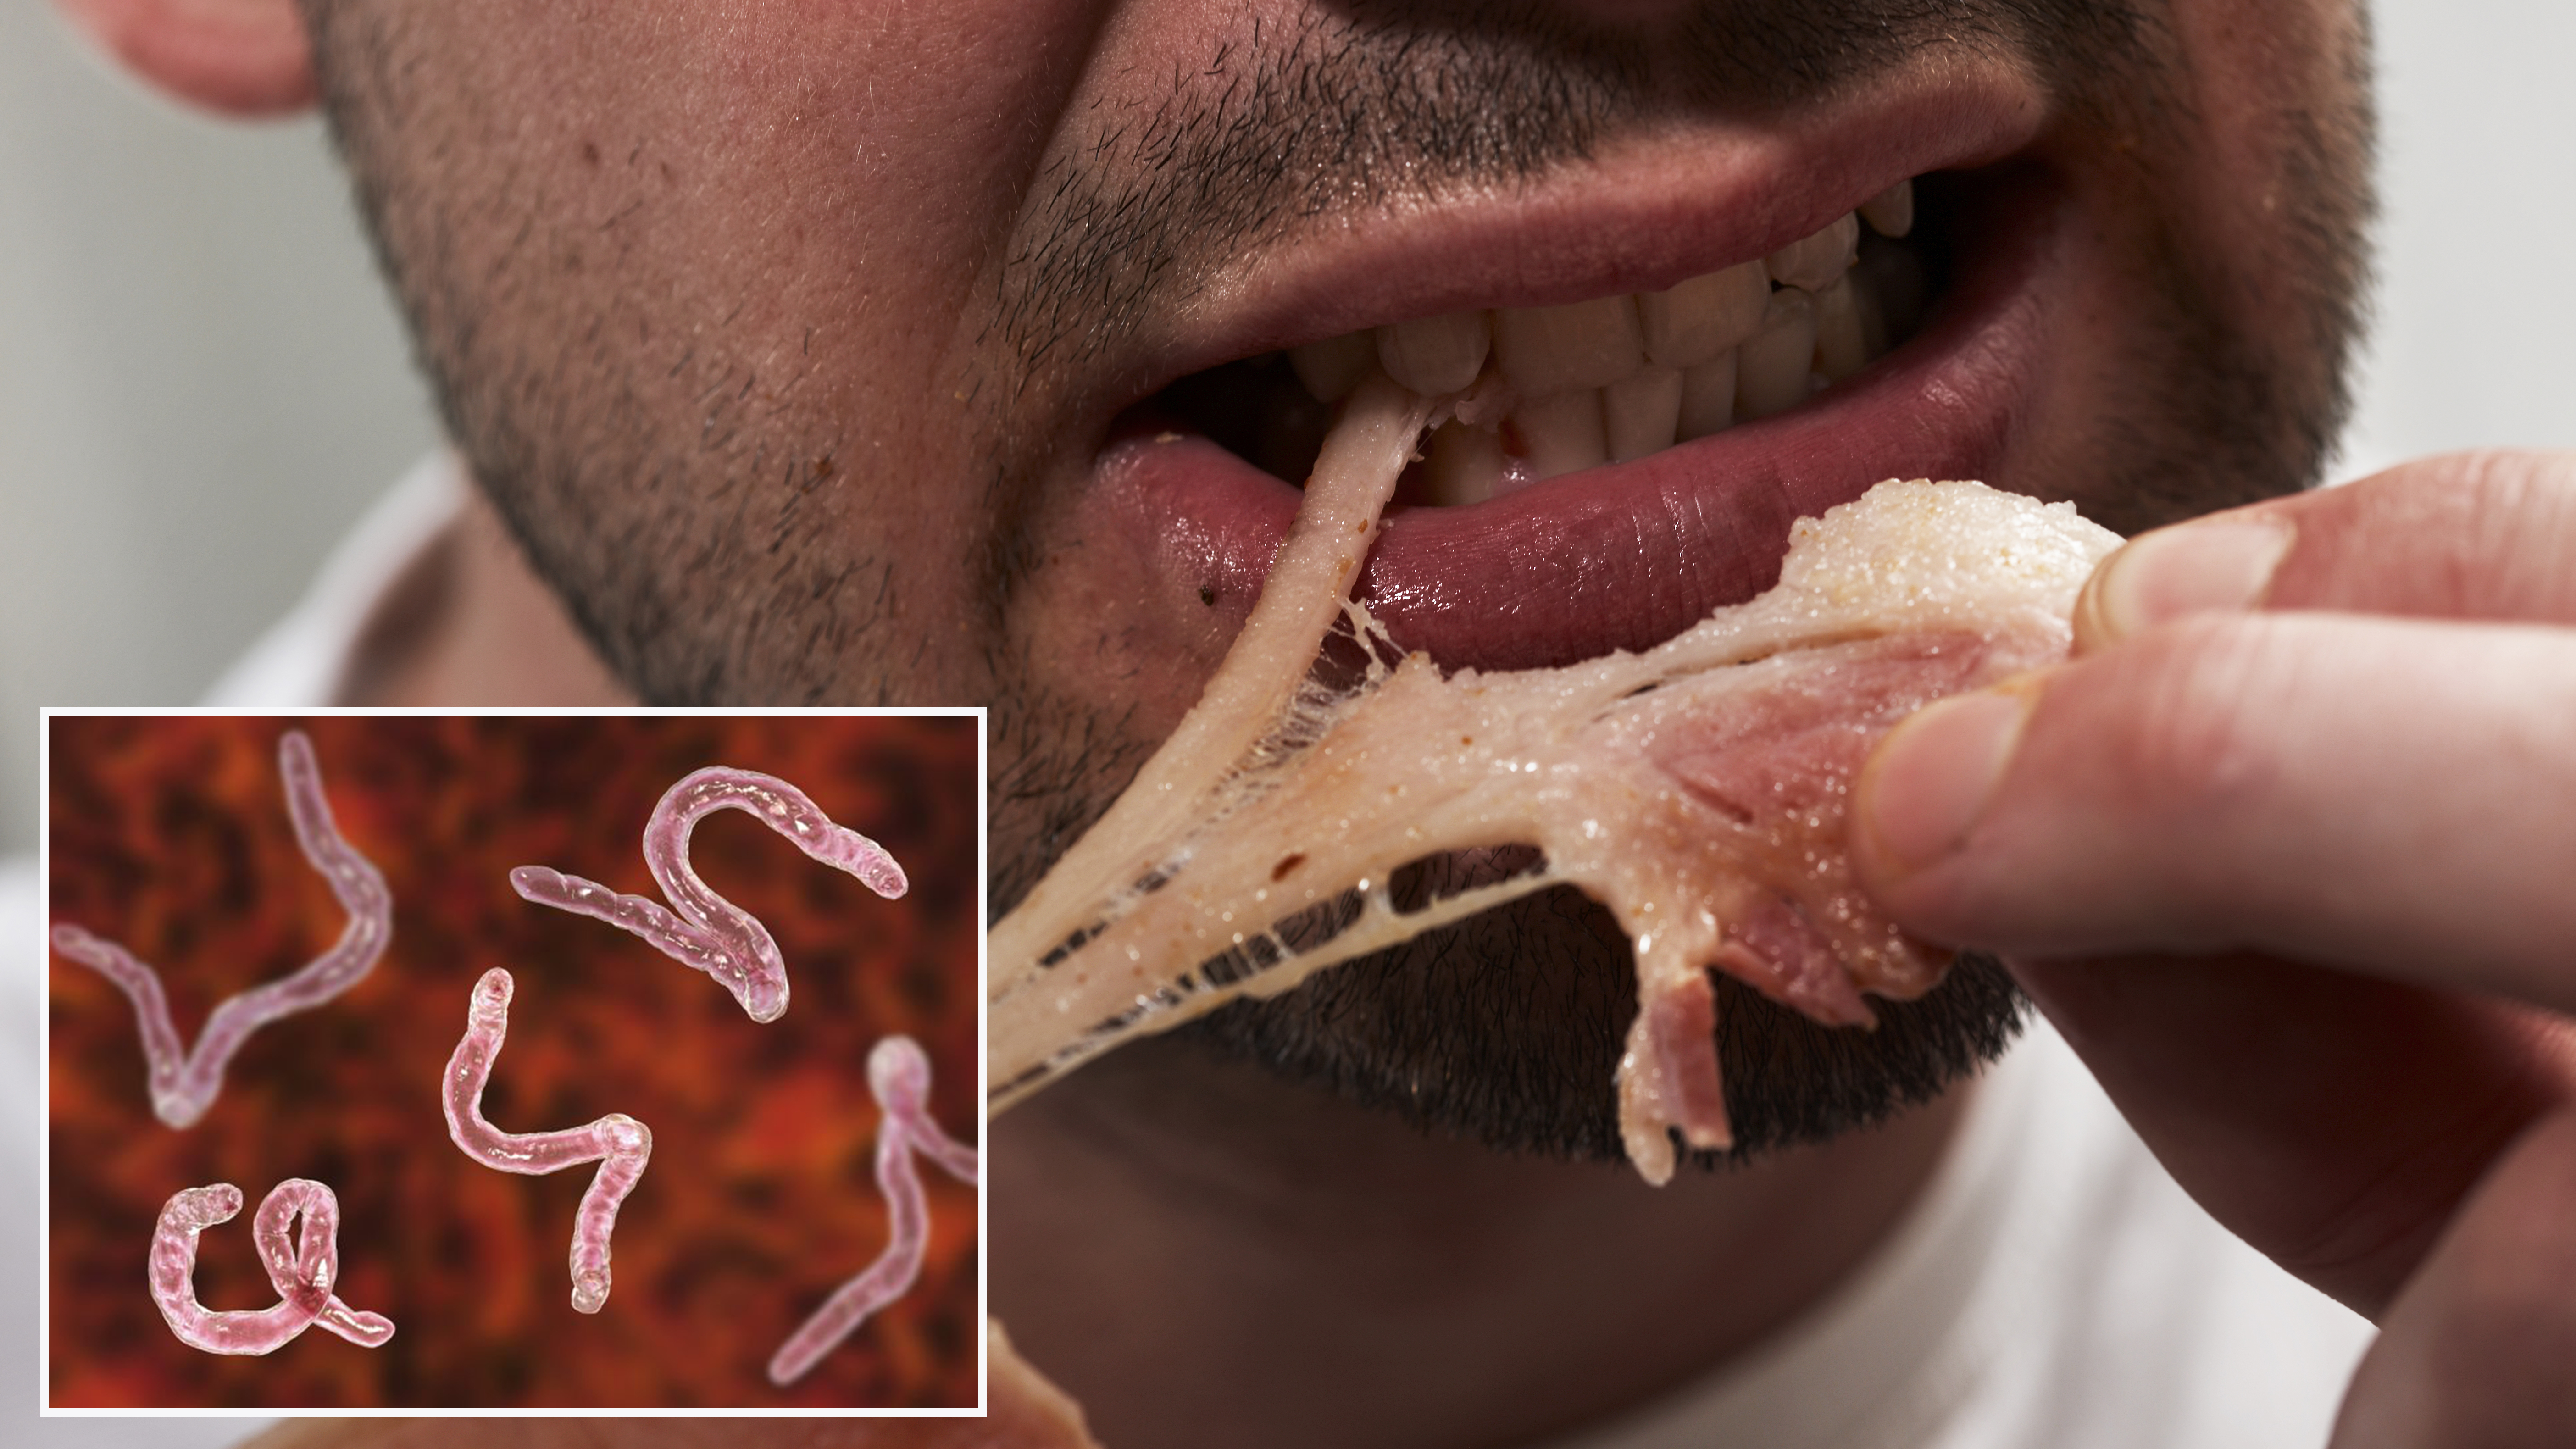 advice juice Glamor Man had 700 tapeworms in his brain after eating undercooked pot